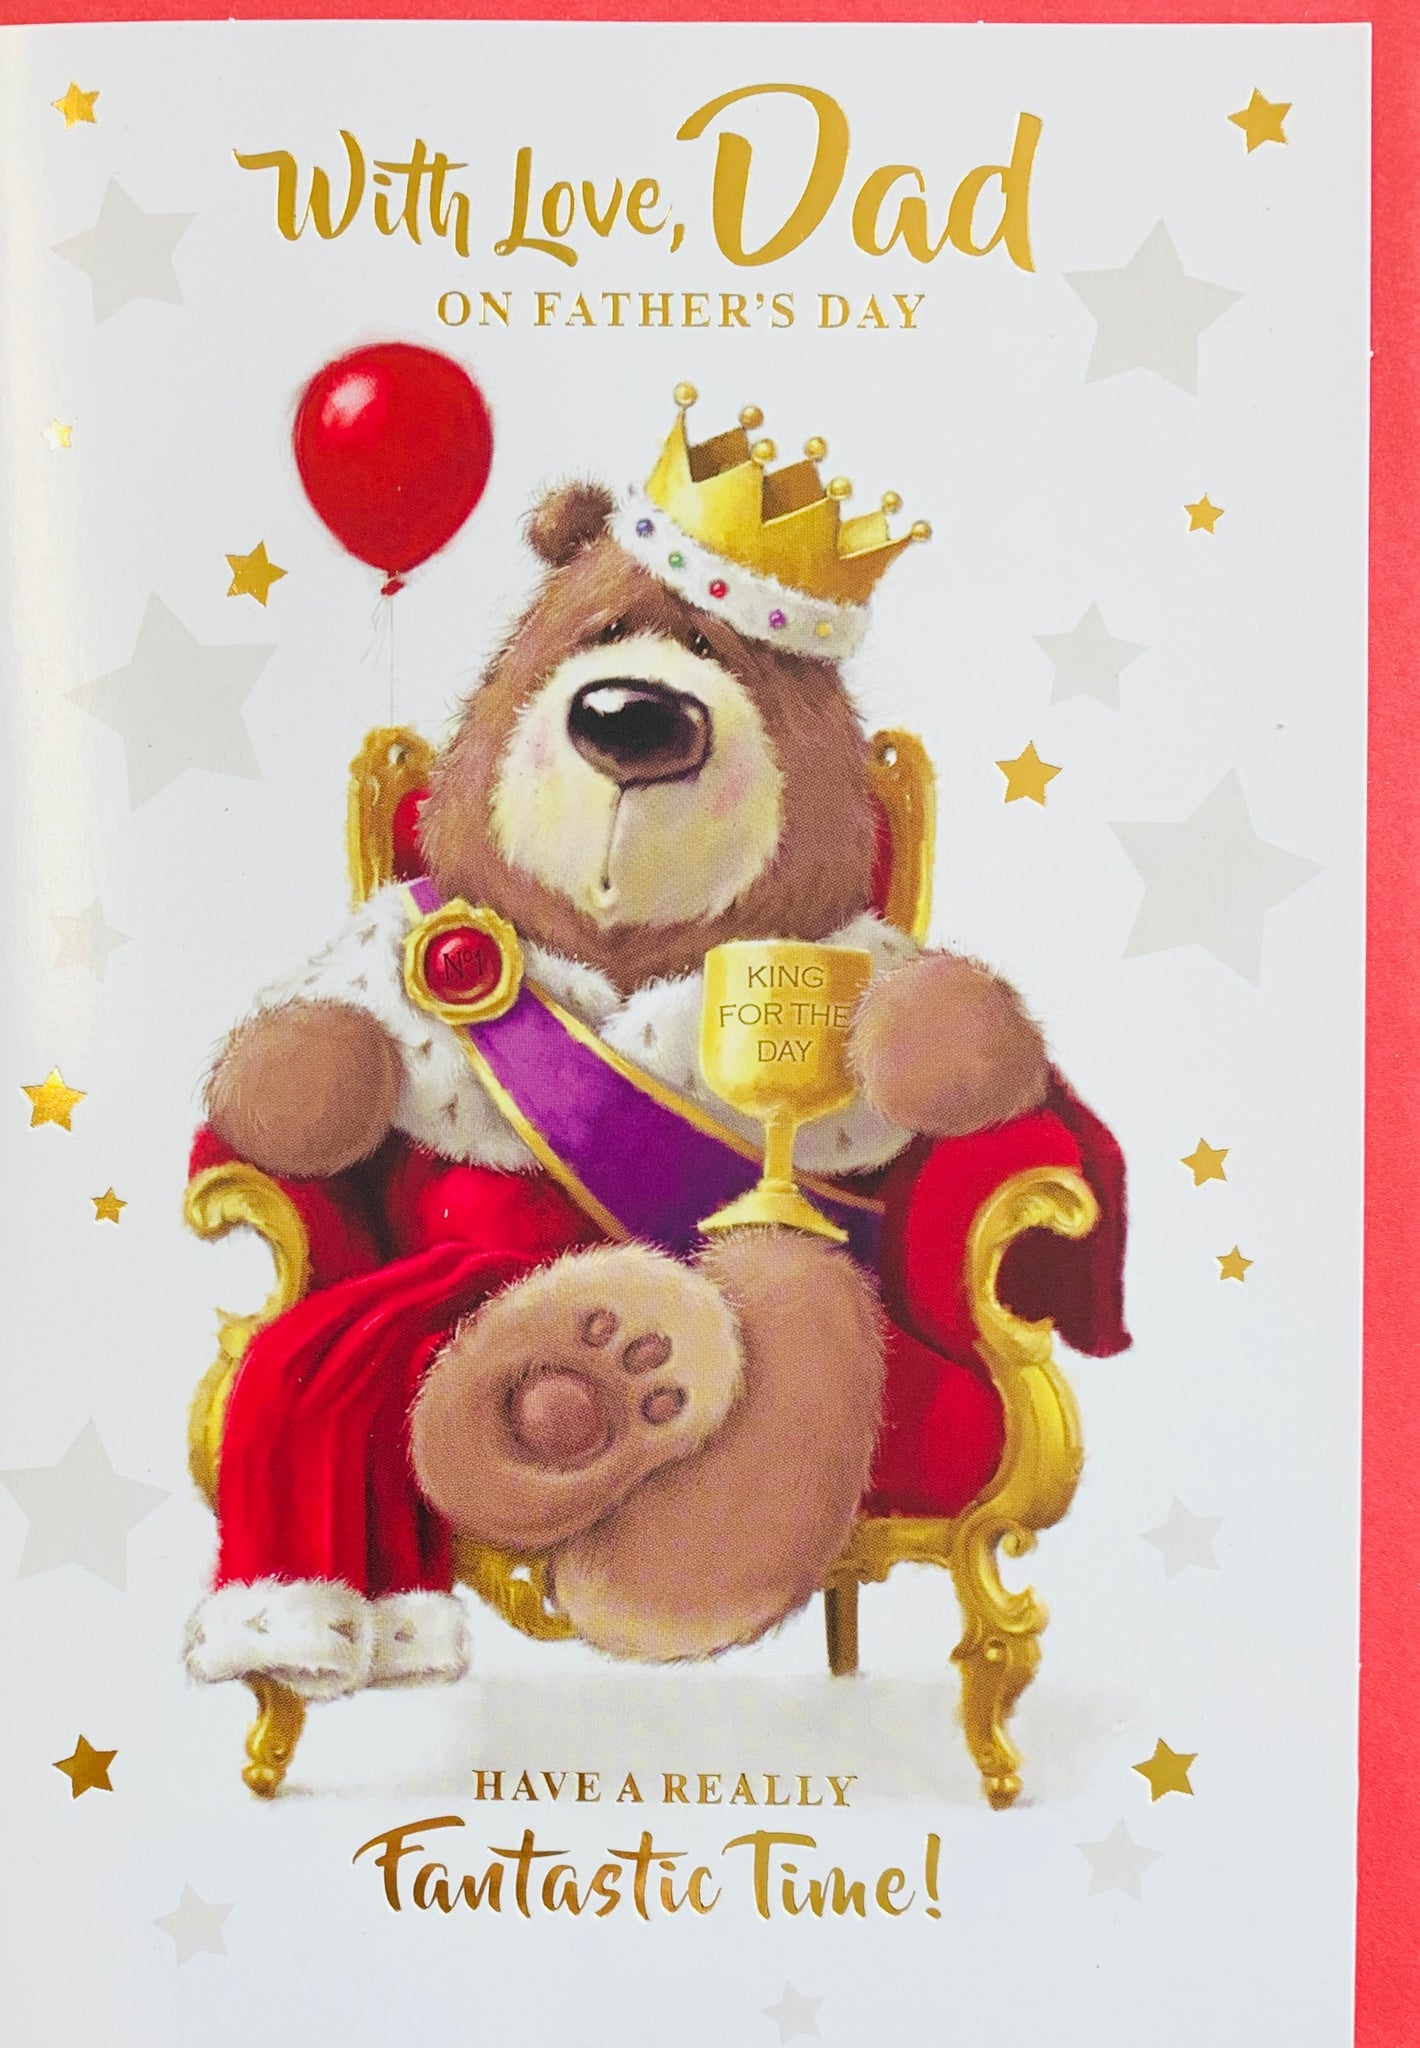 Dad cute Father’s Day card- cute king bear sat on throne